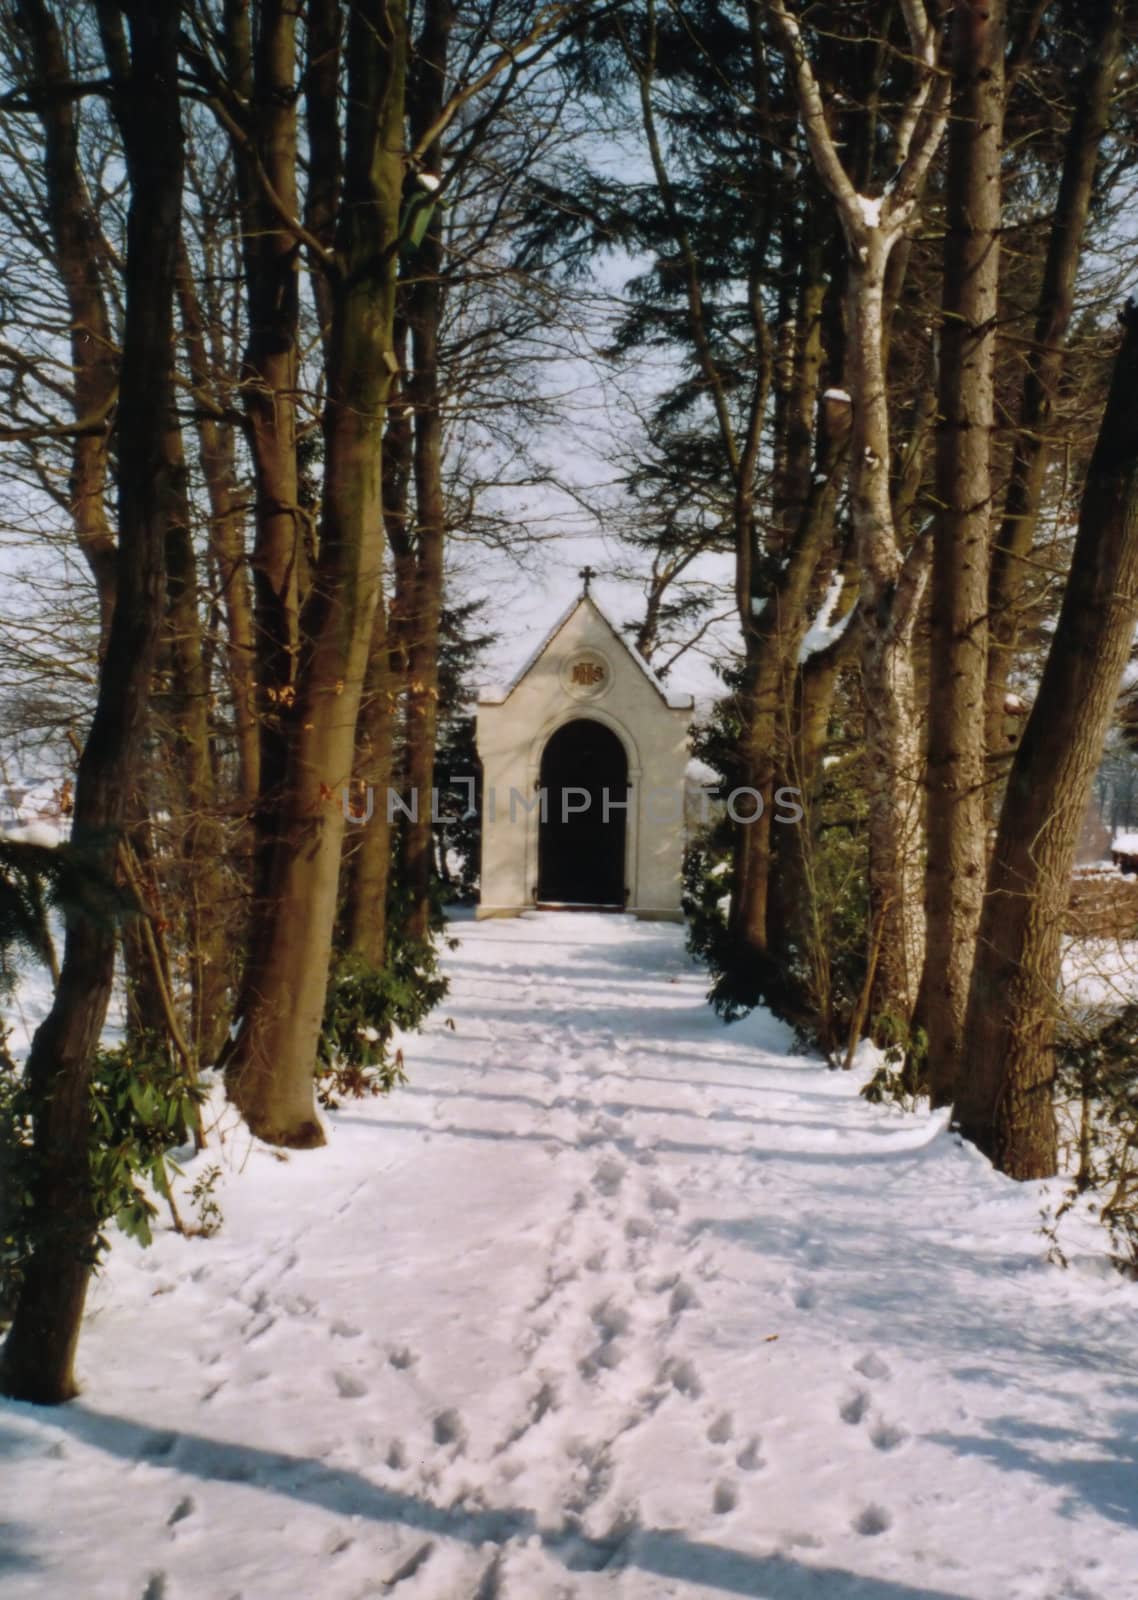 Chapel at the end of a snowy path